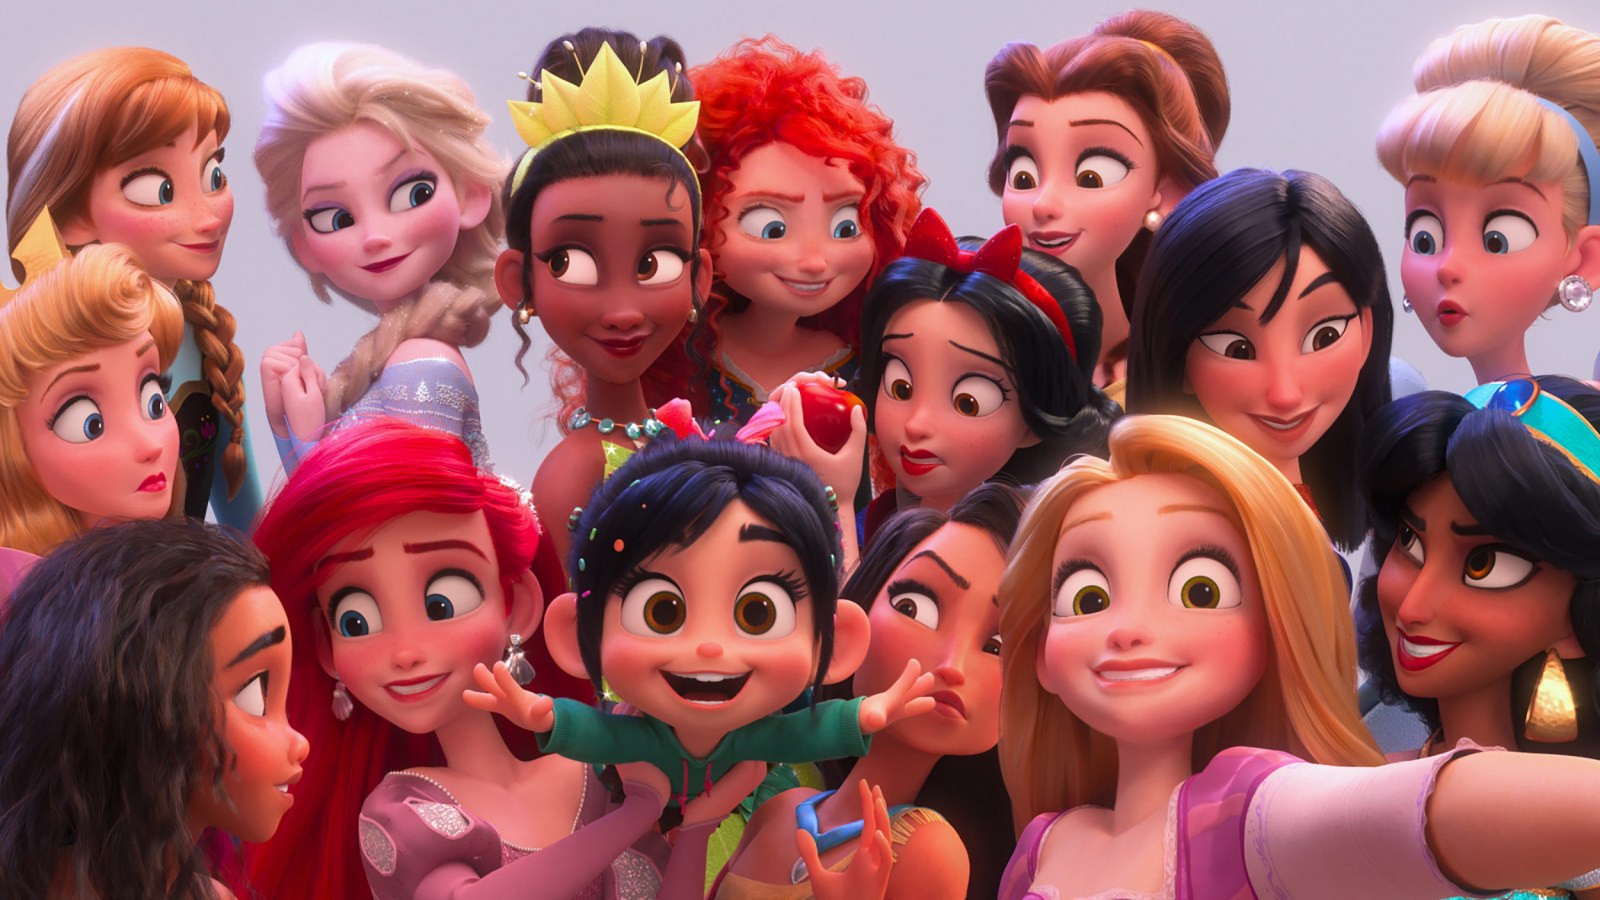 The Ultimate Collection of Disney Princess Images: Over 999 Incredible ...